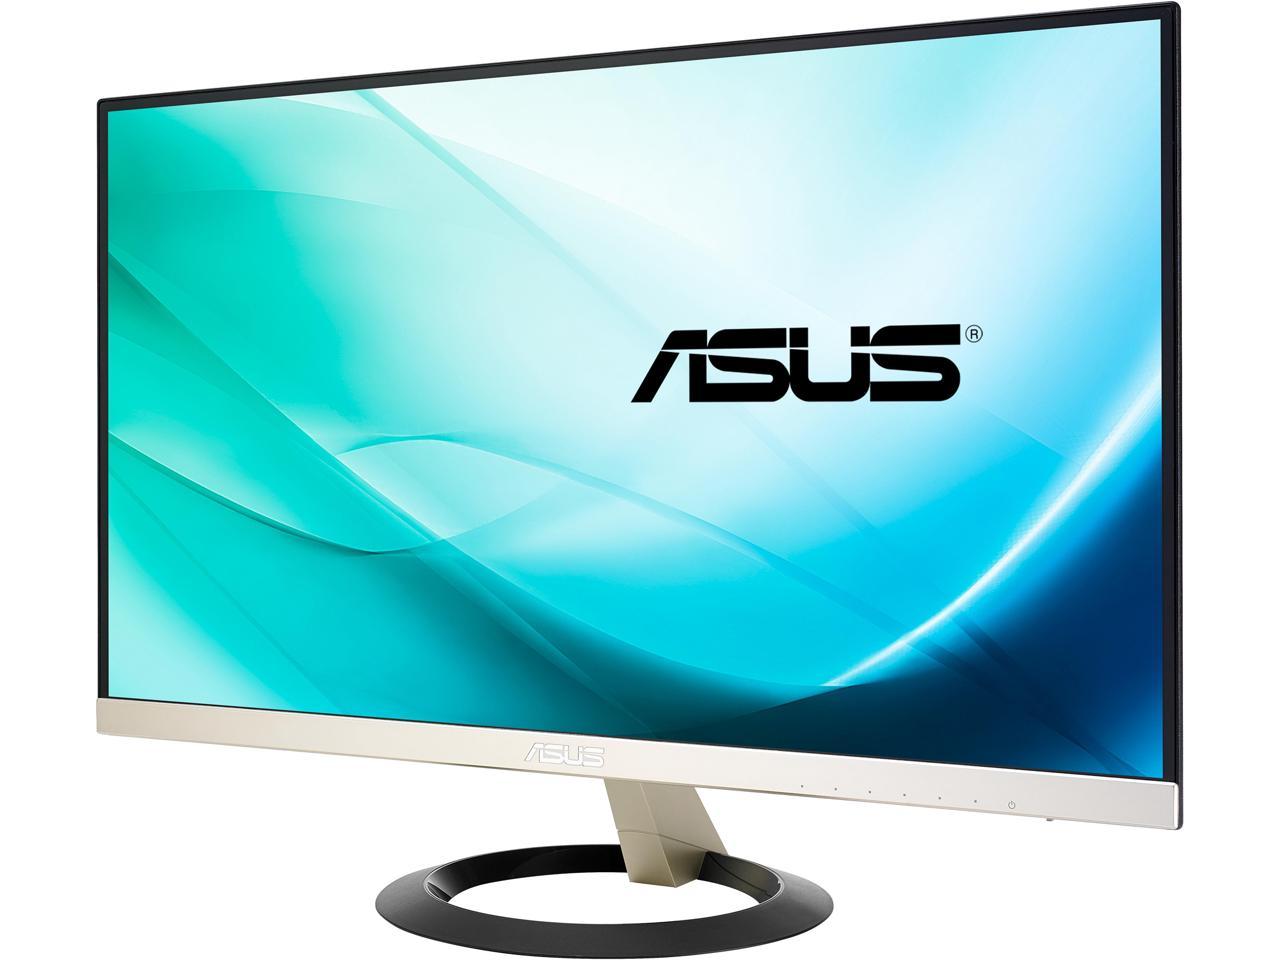 ASUS VZ239H Frameless 23” 5ms (GTG) IPS Widescreen LCD/LED Monitors, HDMI  1920 x 1080 Ultra-Slim Design, w/ Eye Care Feature and Flicker Free 